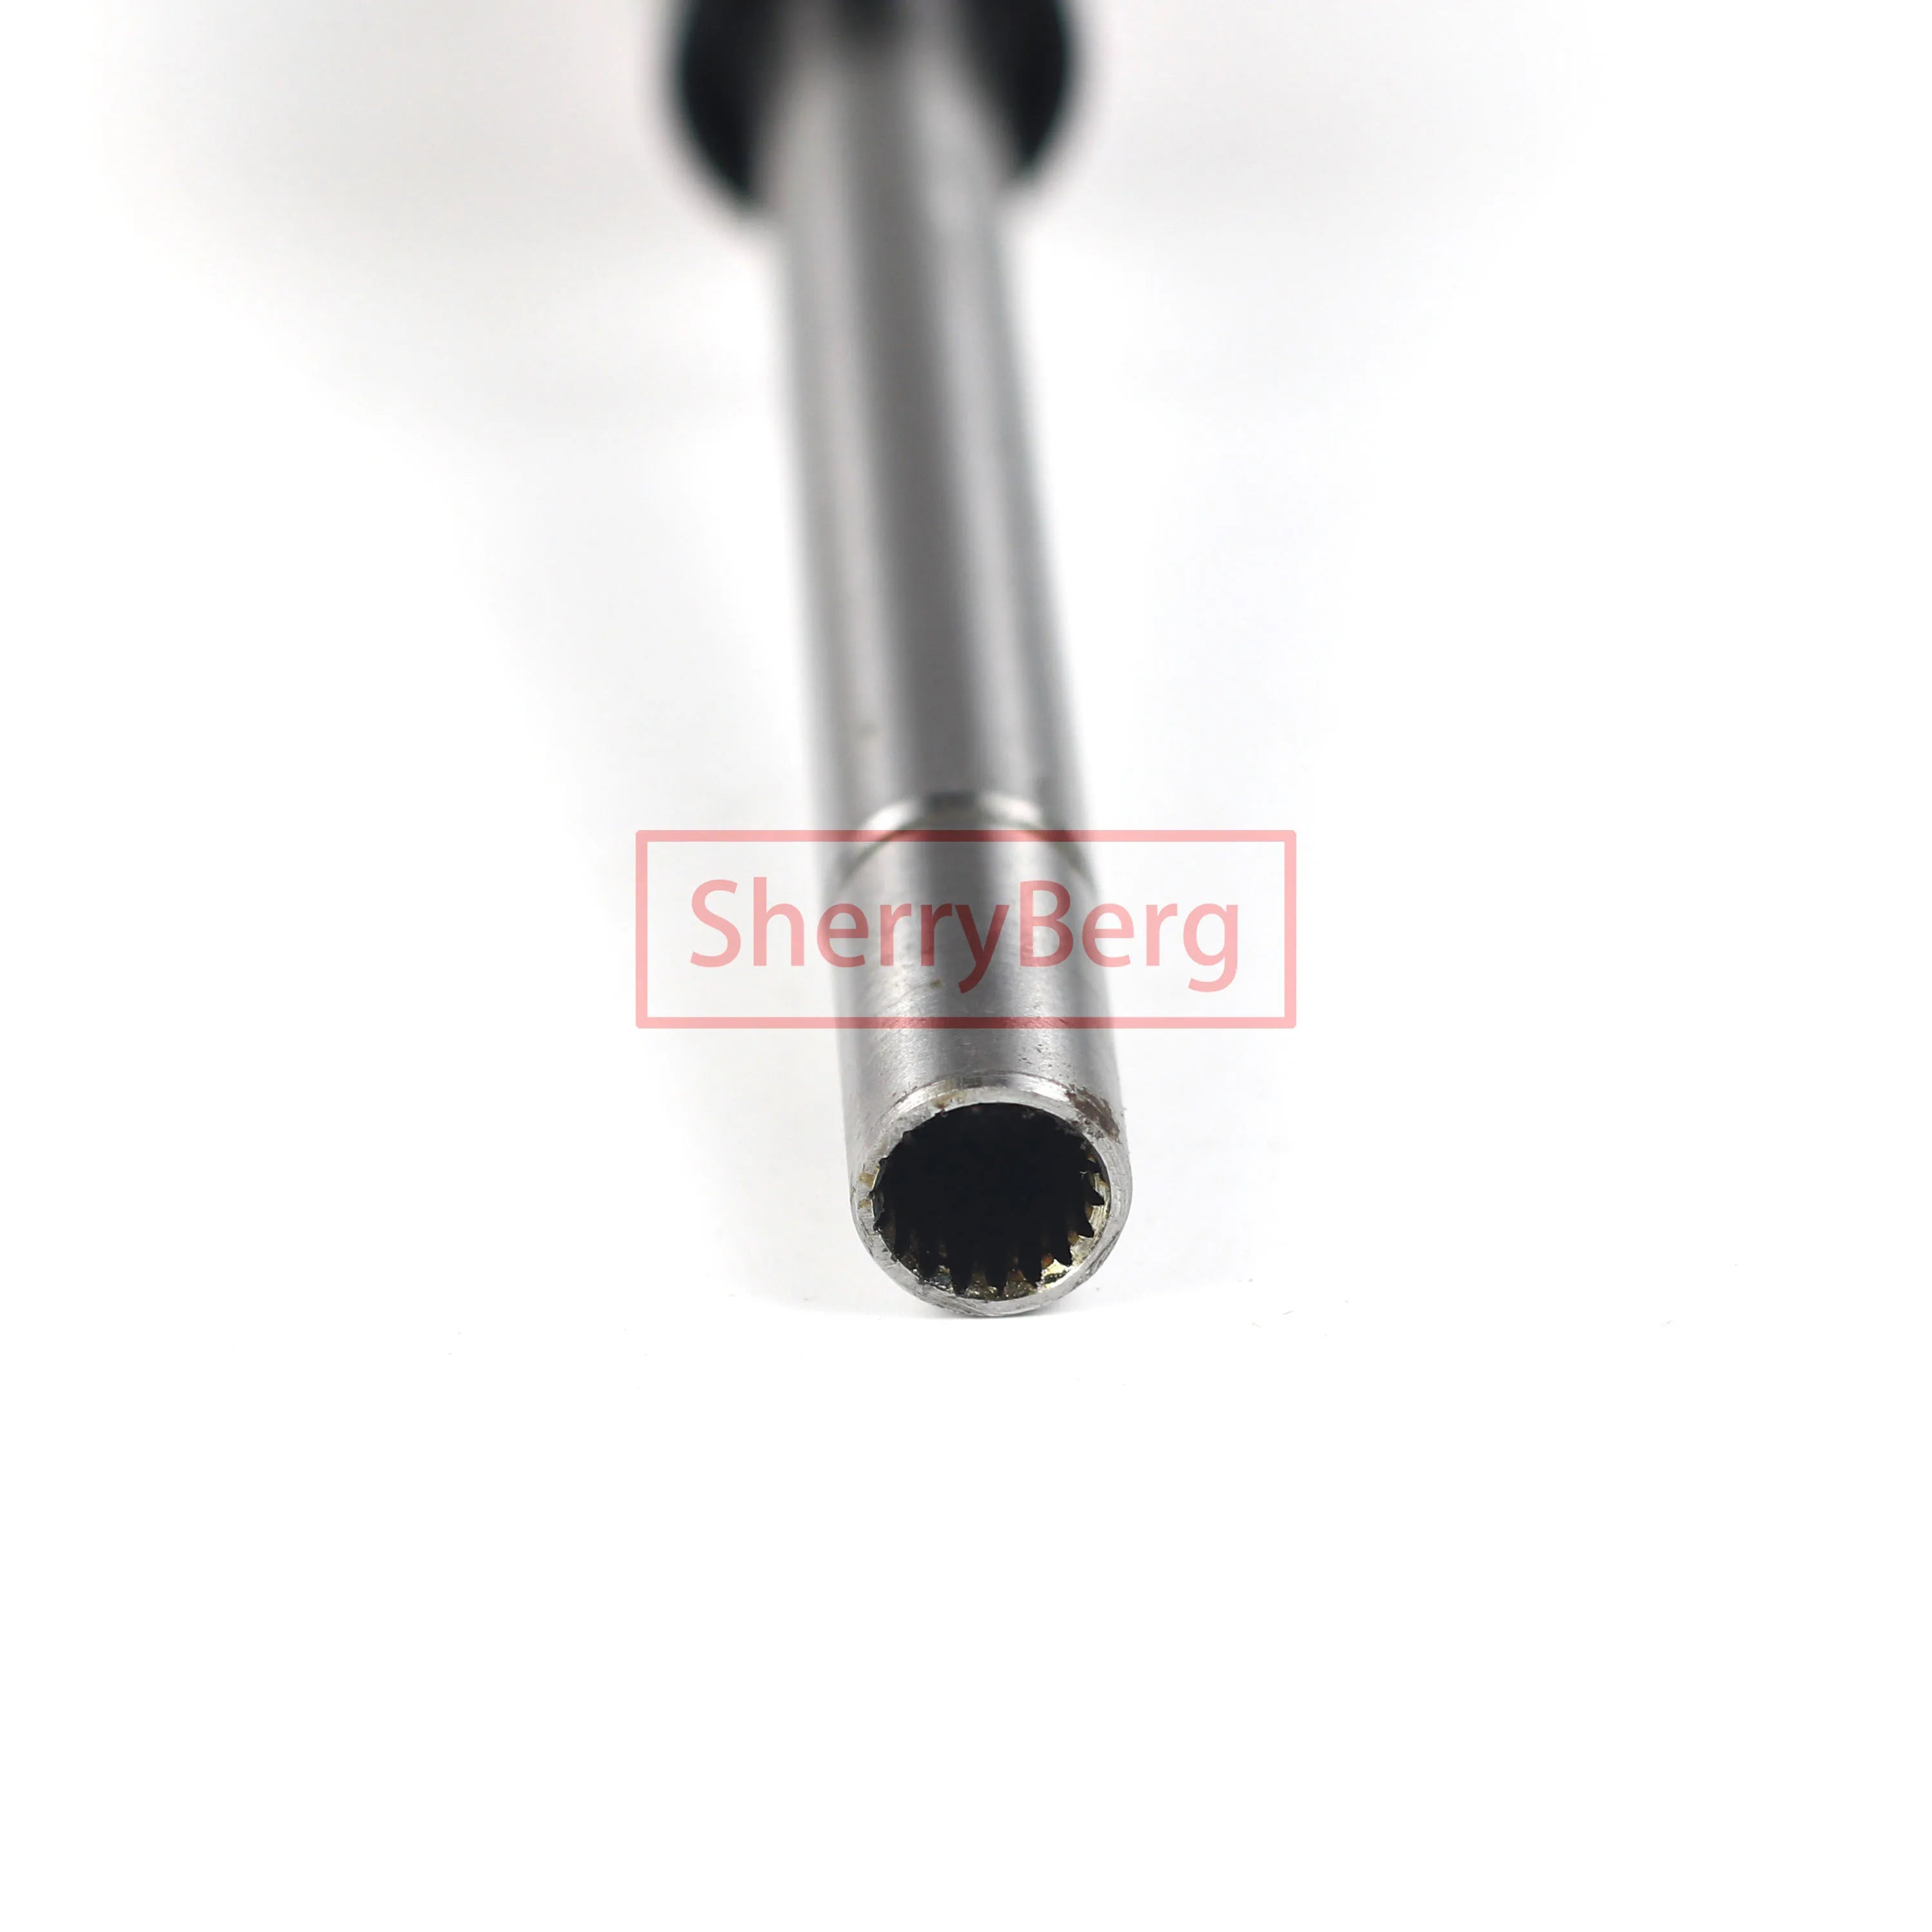 SherryBerg  Electrical Ignition Kit / Distributor for Fiat 127  903cc, Special 903cc  1975-1977  127  900 C, L, CL   1977-1983